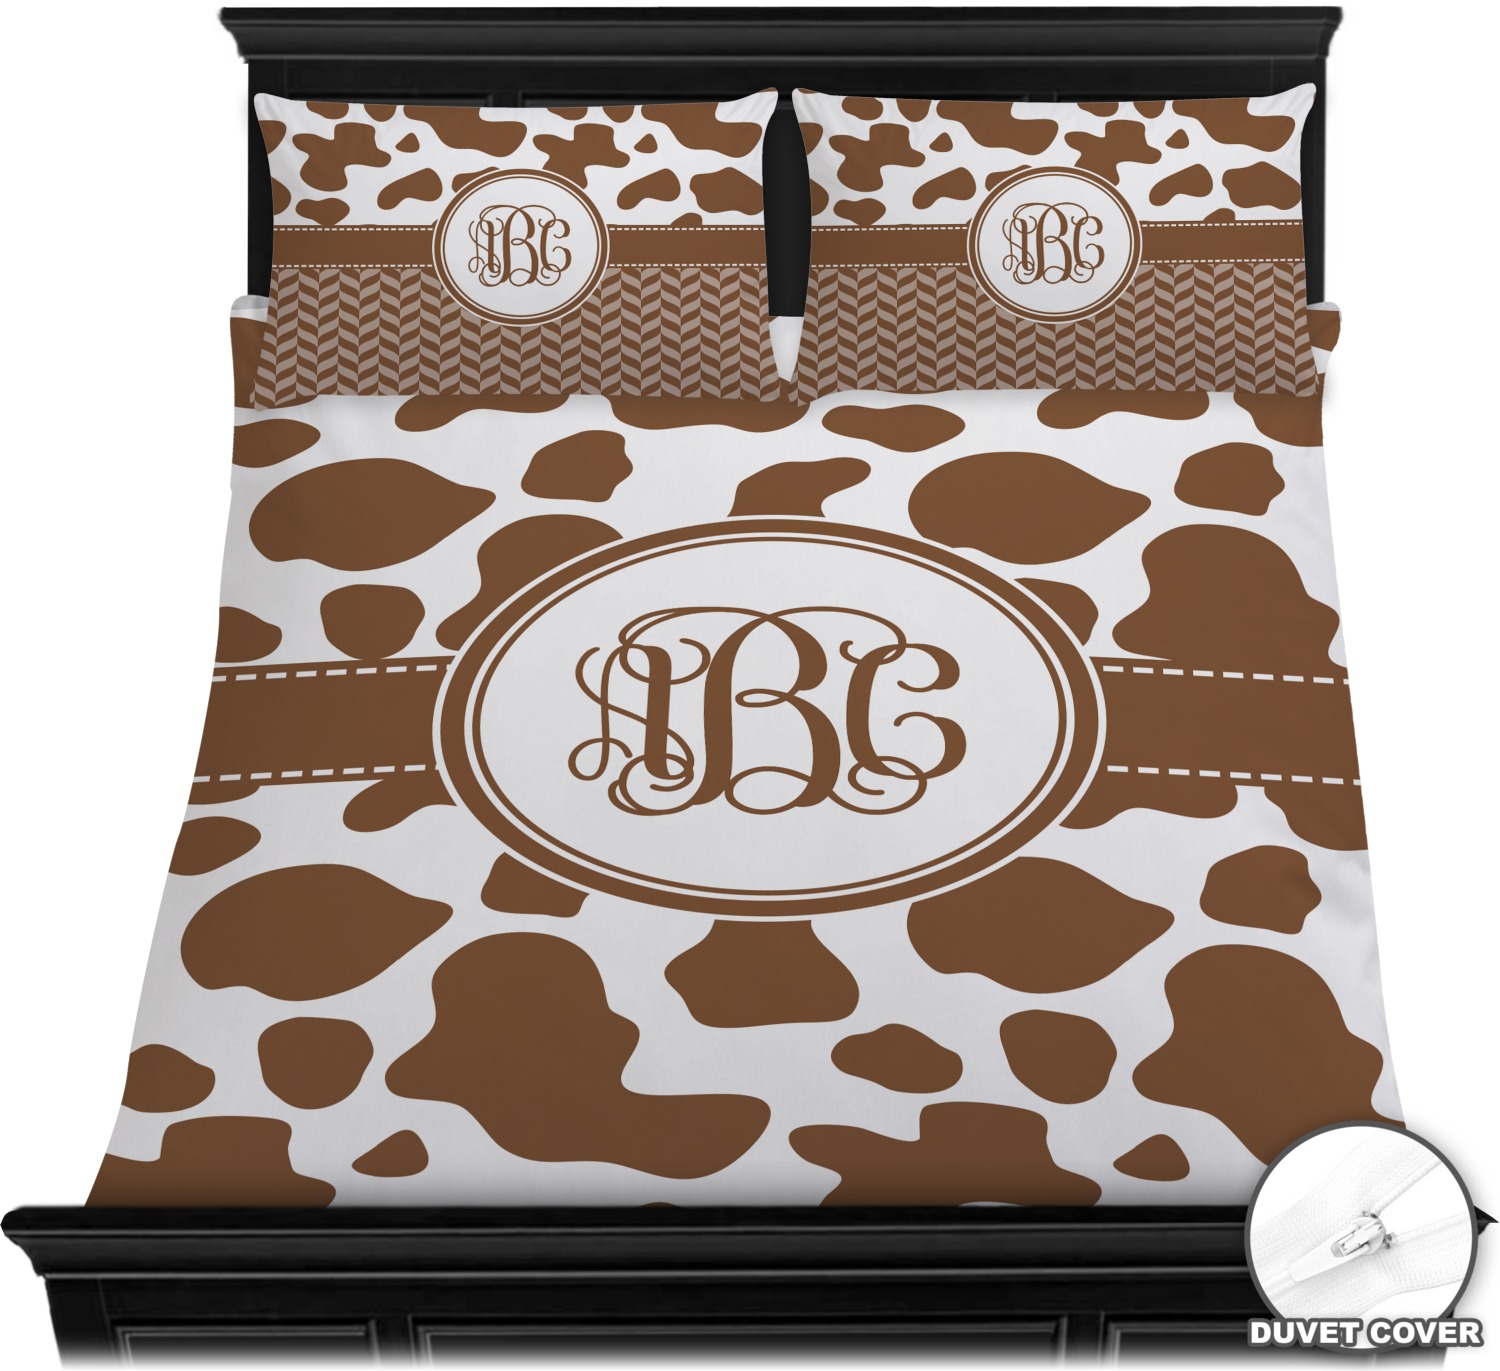 Cow Print Duvet Covers Personalized Youcustomizeit